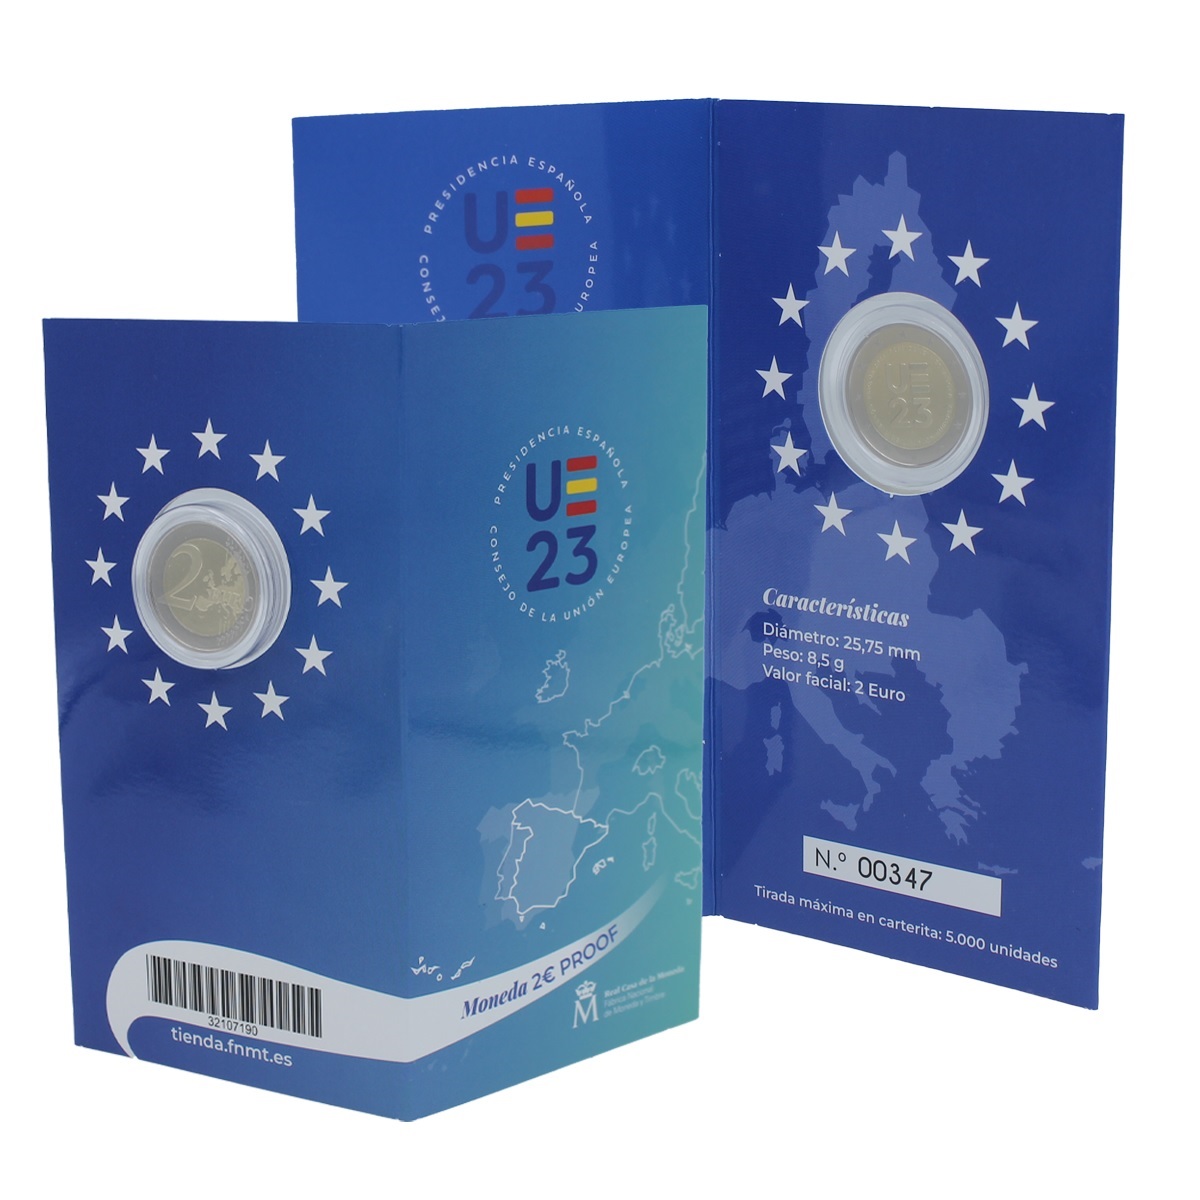 (EUR05.Proof.2023.32107190) 2 euro commemorative coin Spain 2023 Proof - Presidency of the Council of the EU (zoom)